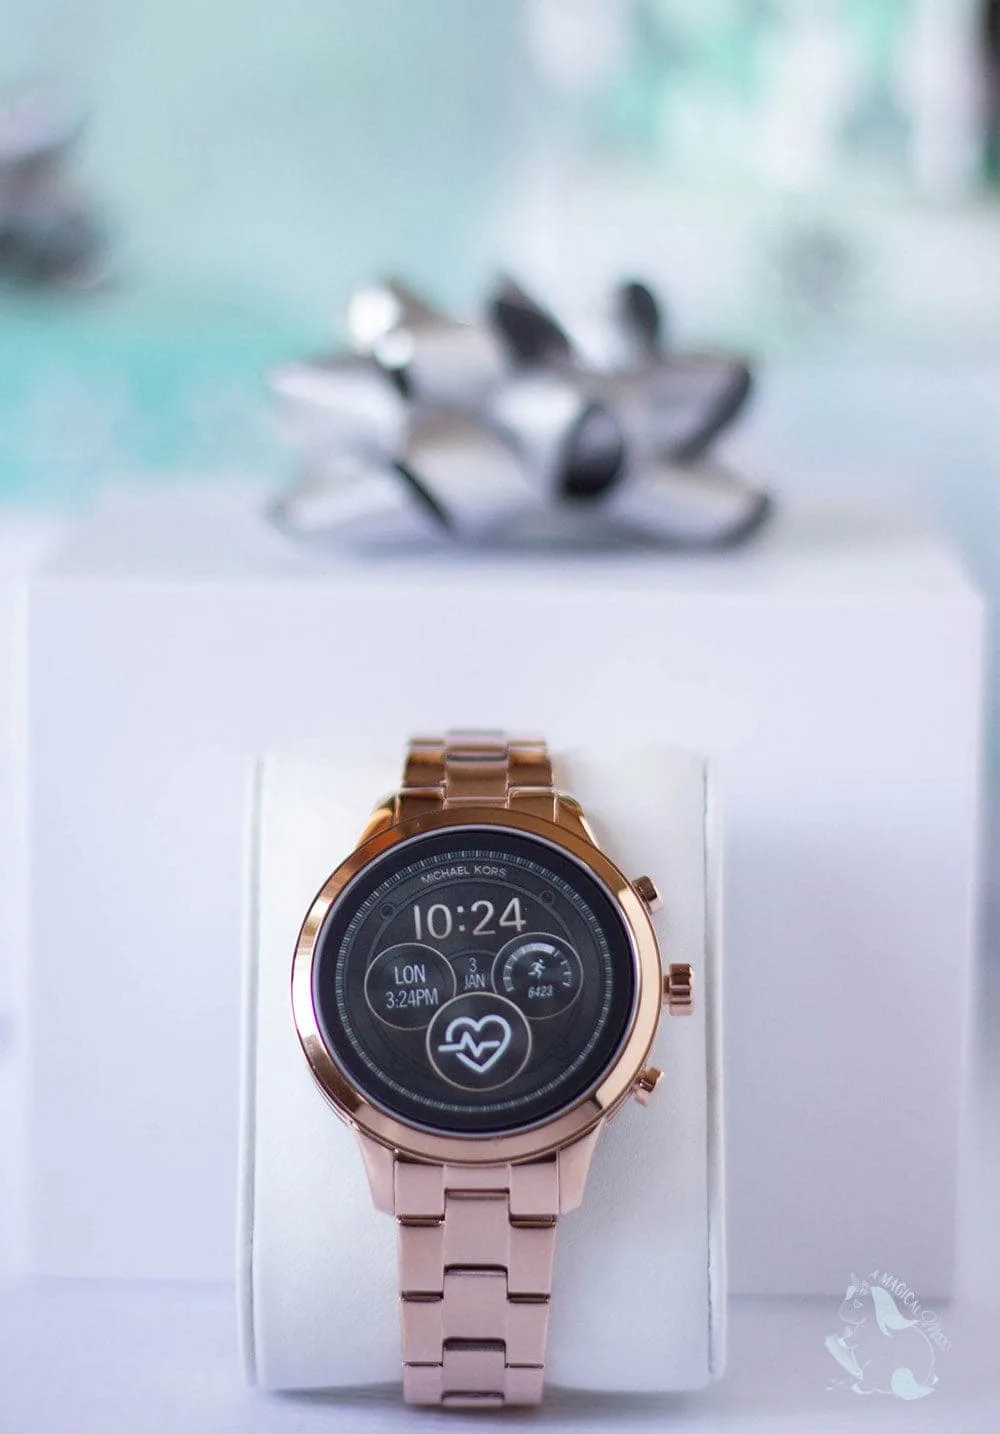 Michael Kors Access Runway Smartwatch out of the box.